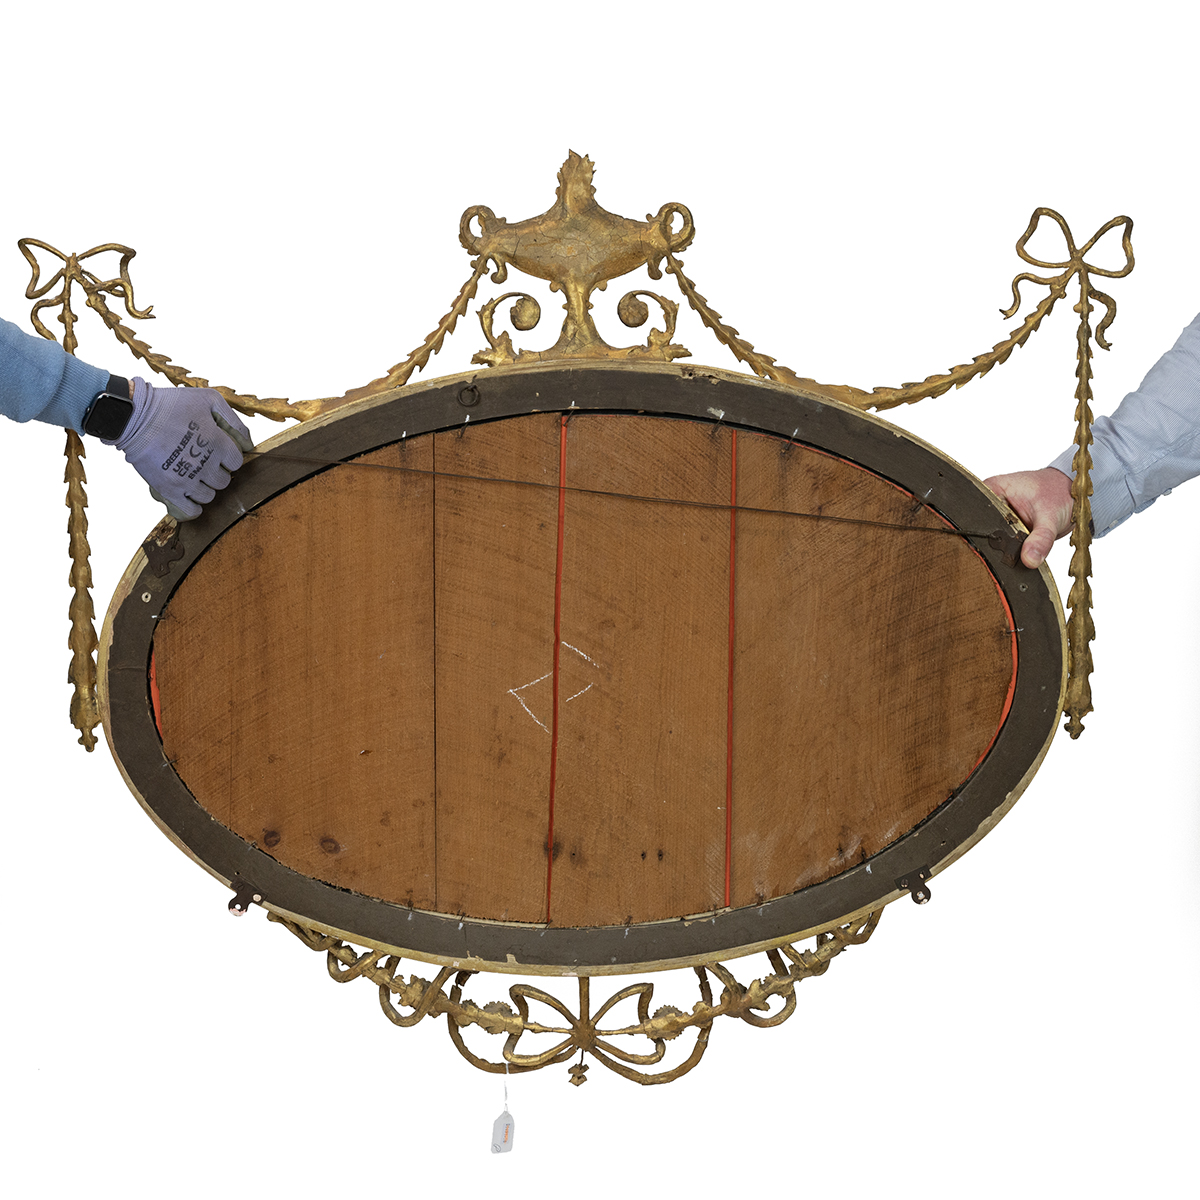 Regency Adams style oval mirror, with bevelled glass, the gilt wooden frame decorated with gilt b... - Image 2 of 2